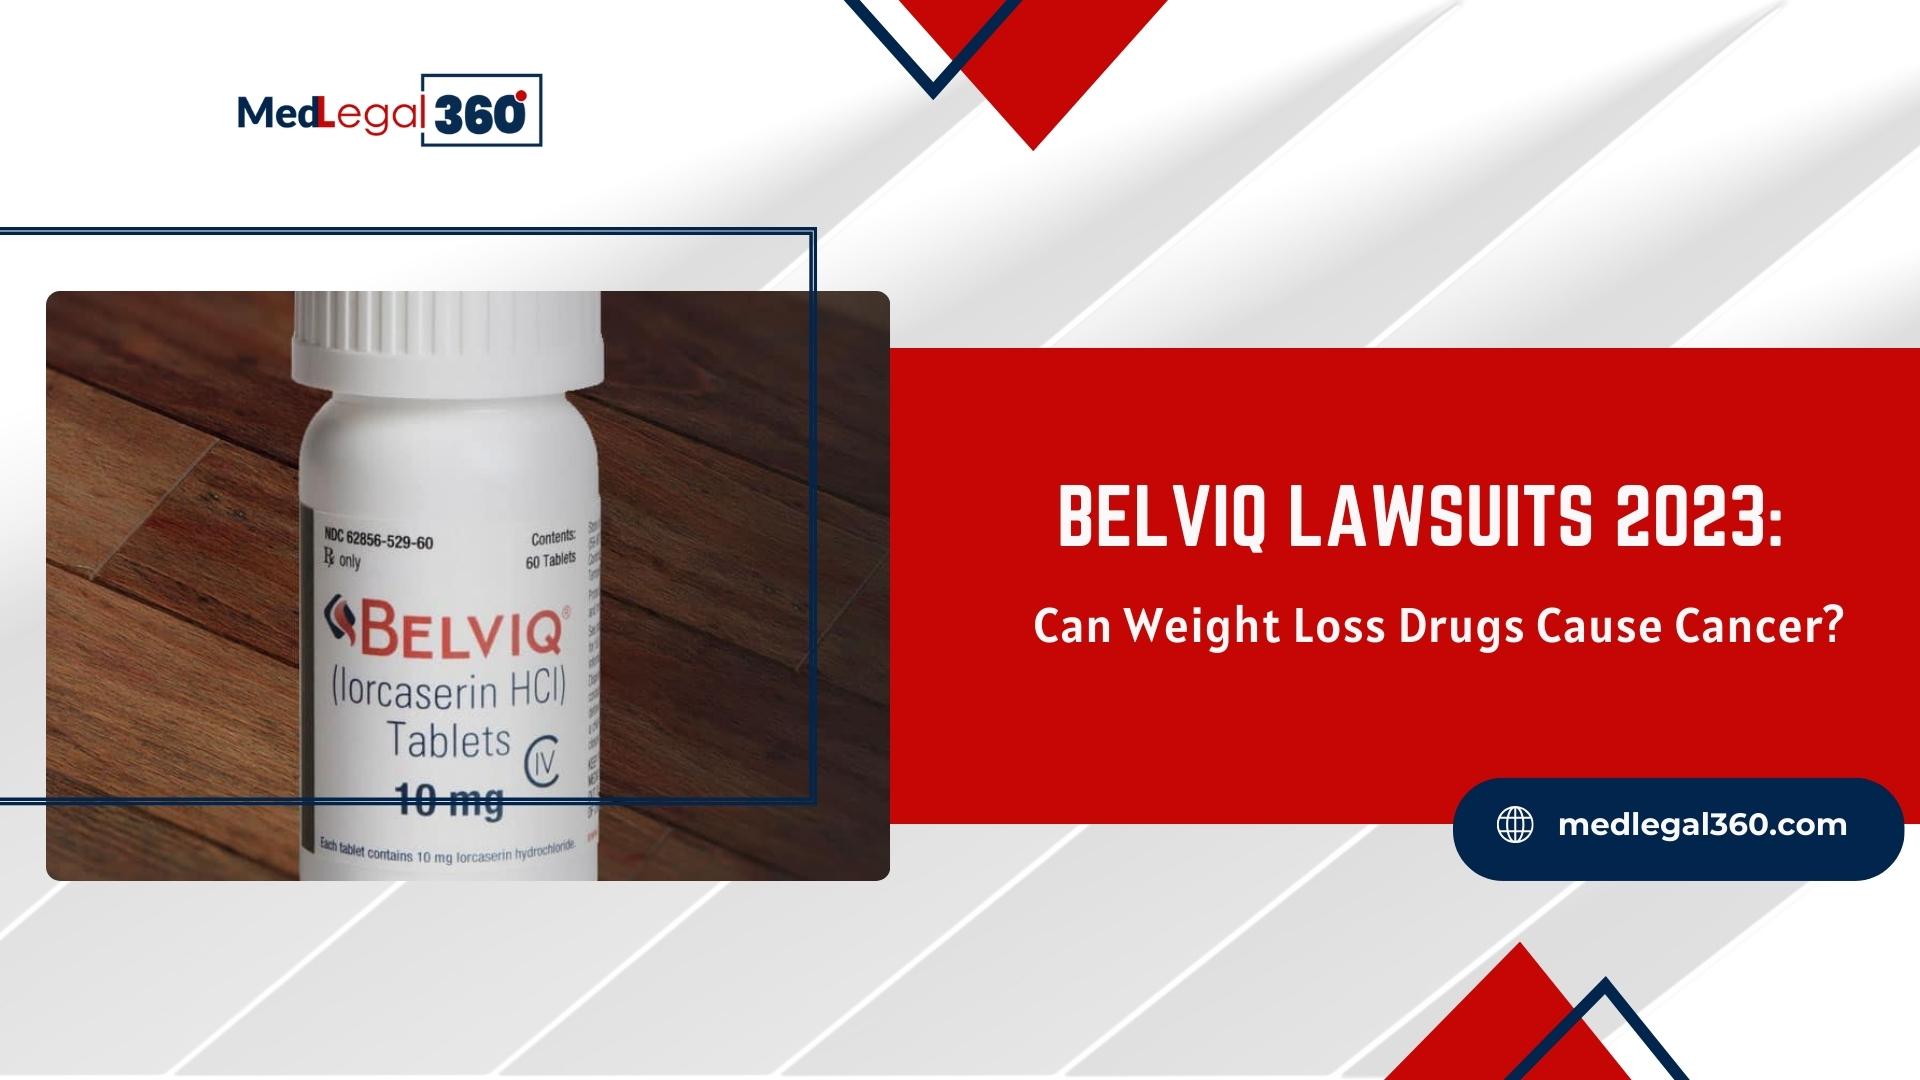 Belviq Lawsuits 2023: Can Weight Loss Drugs Cause Cancer?